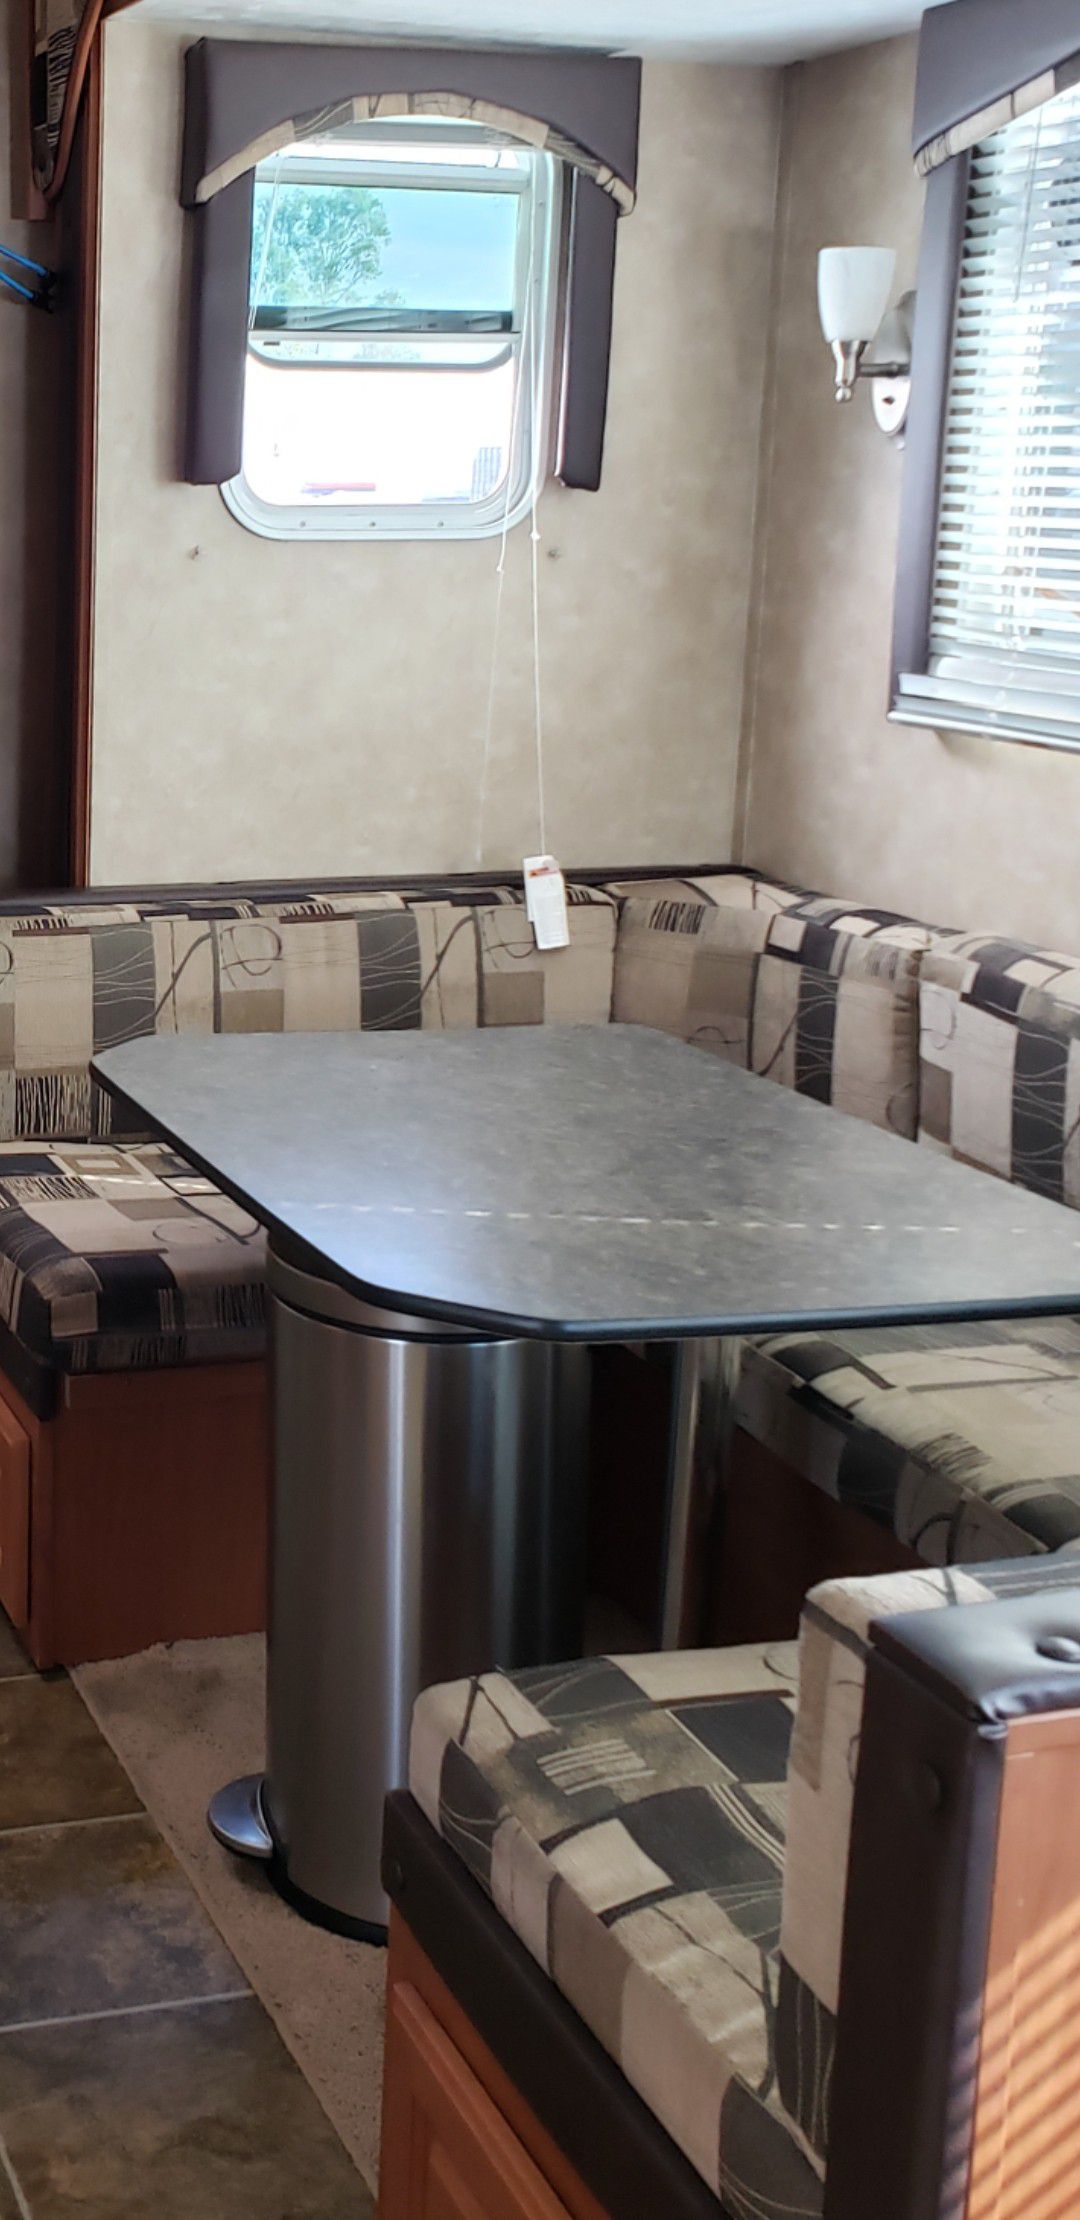 RV KITCHEN TABLE AN HORSE BENCH 7FOOT 3 inches long turns into bed also